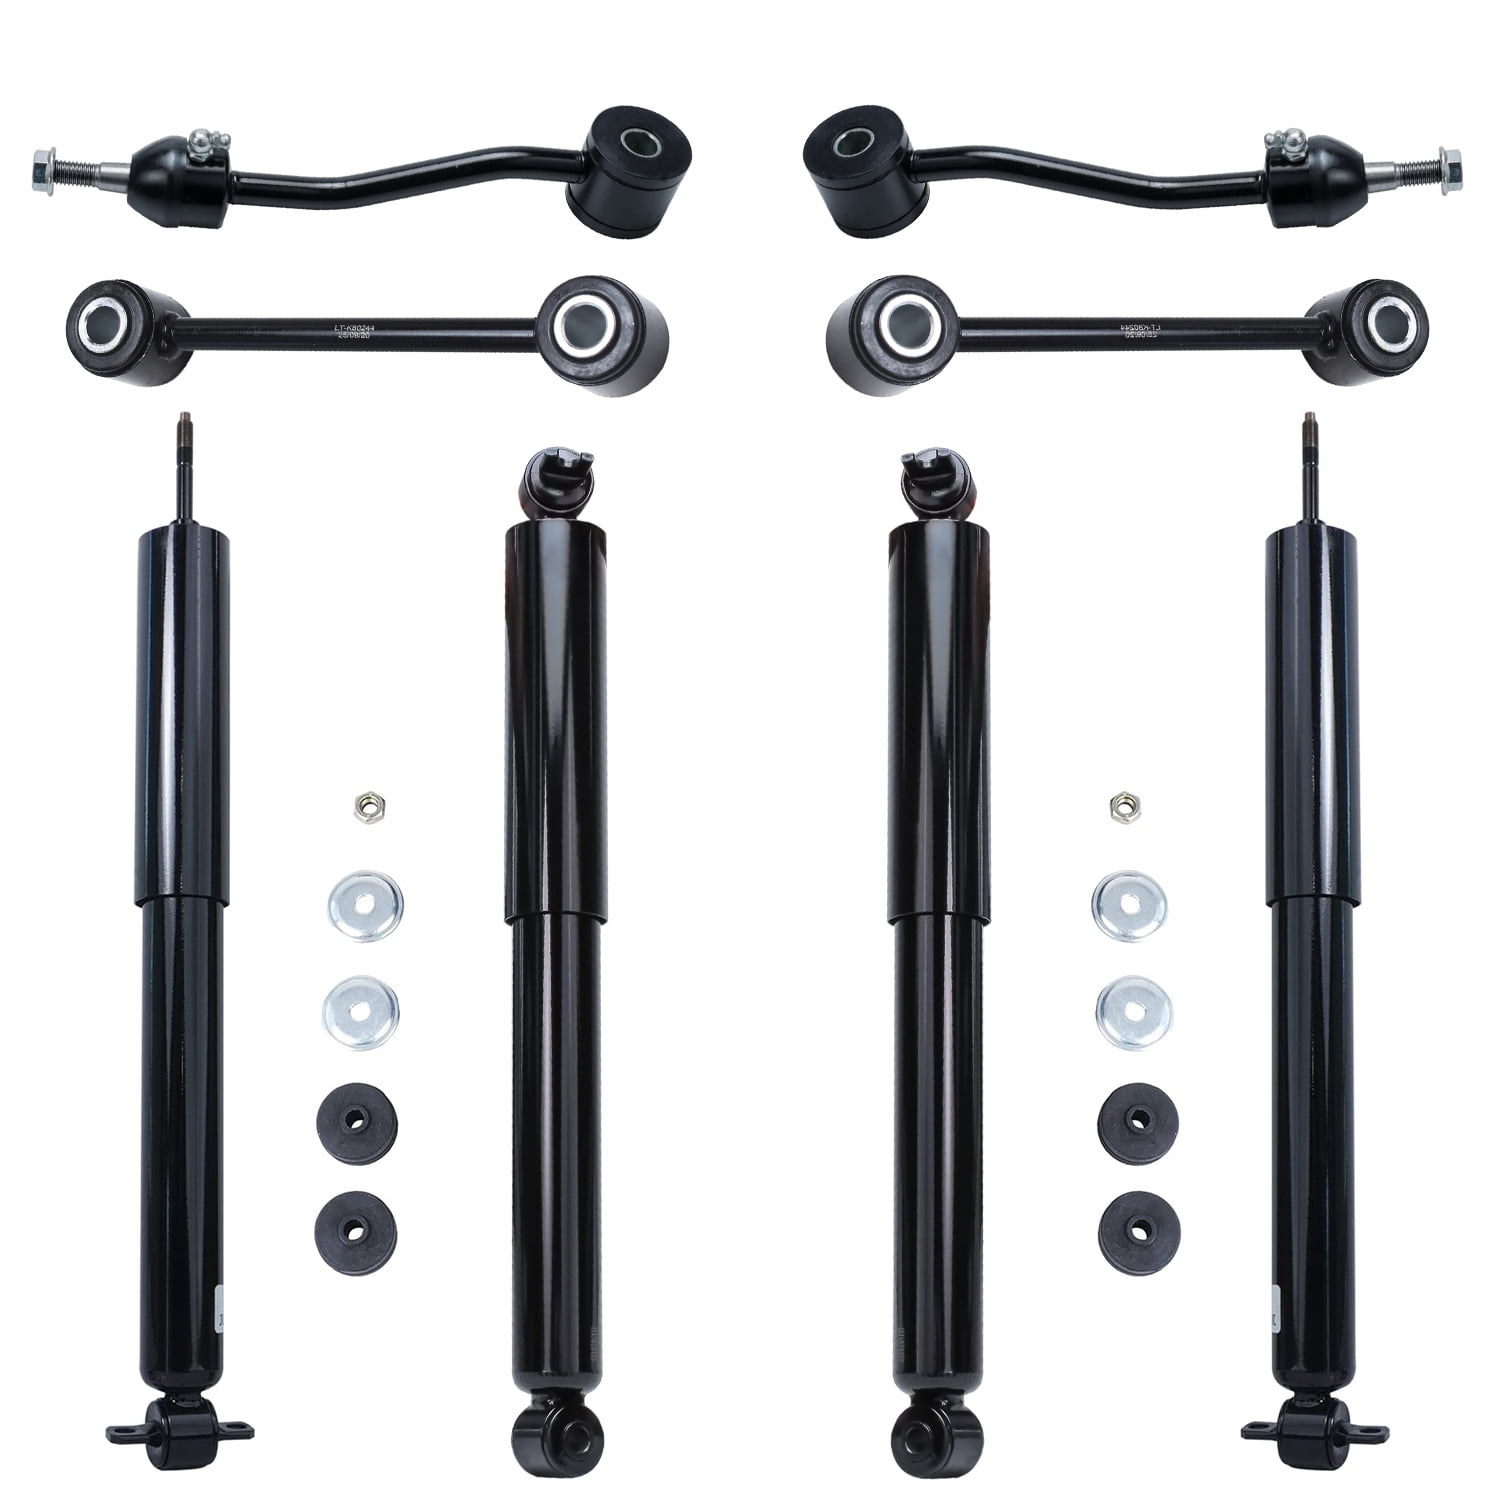 Detroit Axle - Front Rear Shock Absorbers Sway Bar Links Replacement for  1997-2006 Jeep Wrangler - 8pc Set 